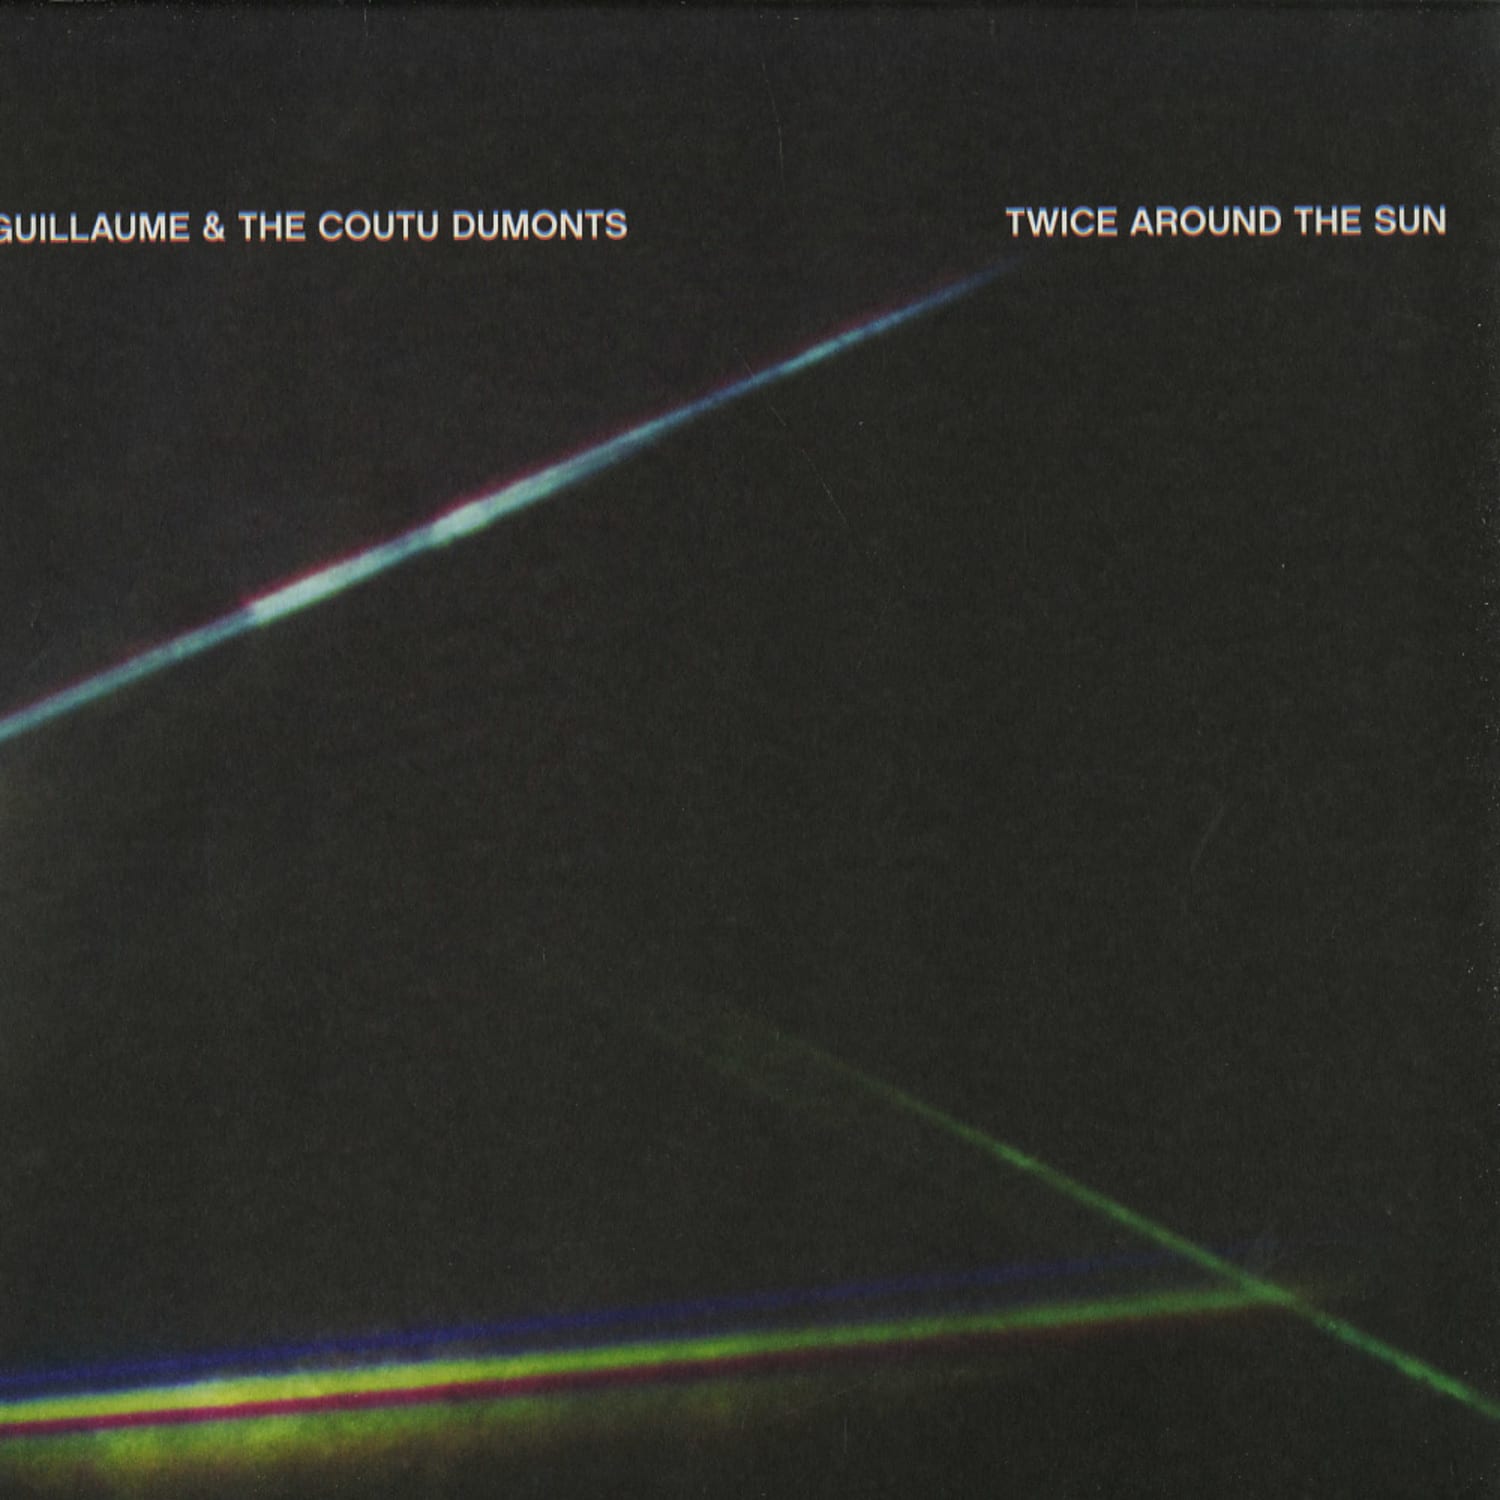 Guillaume & The Coutu Dumonts - TWICE AROUND THE SUN 